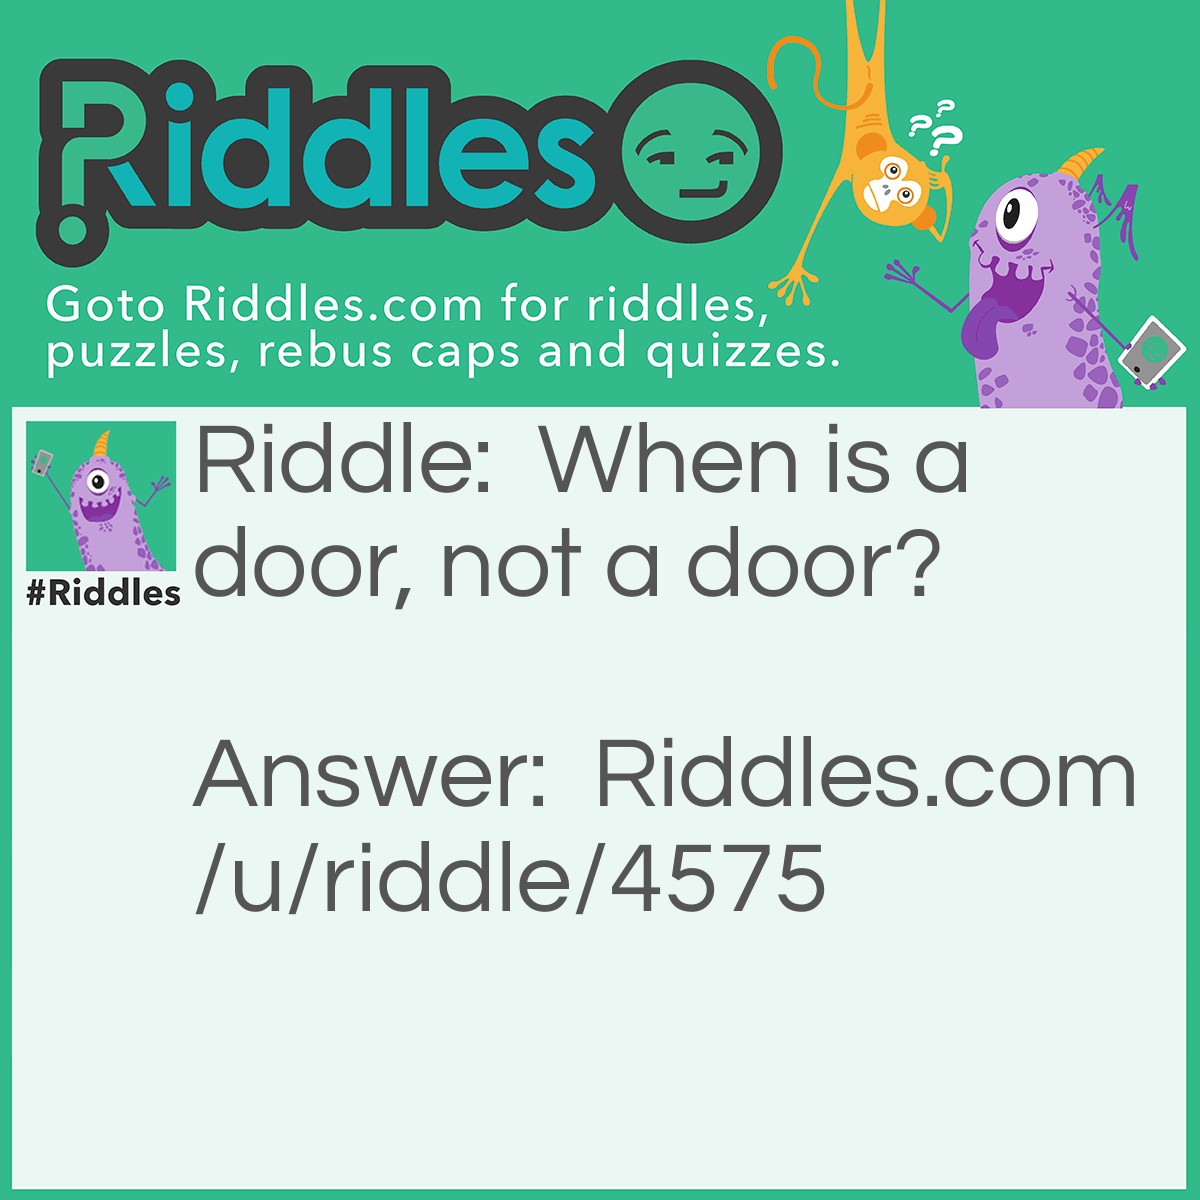 Riddle: When is a door, not a door? Answer: When it is ajar!